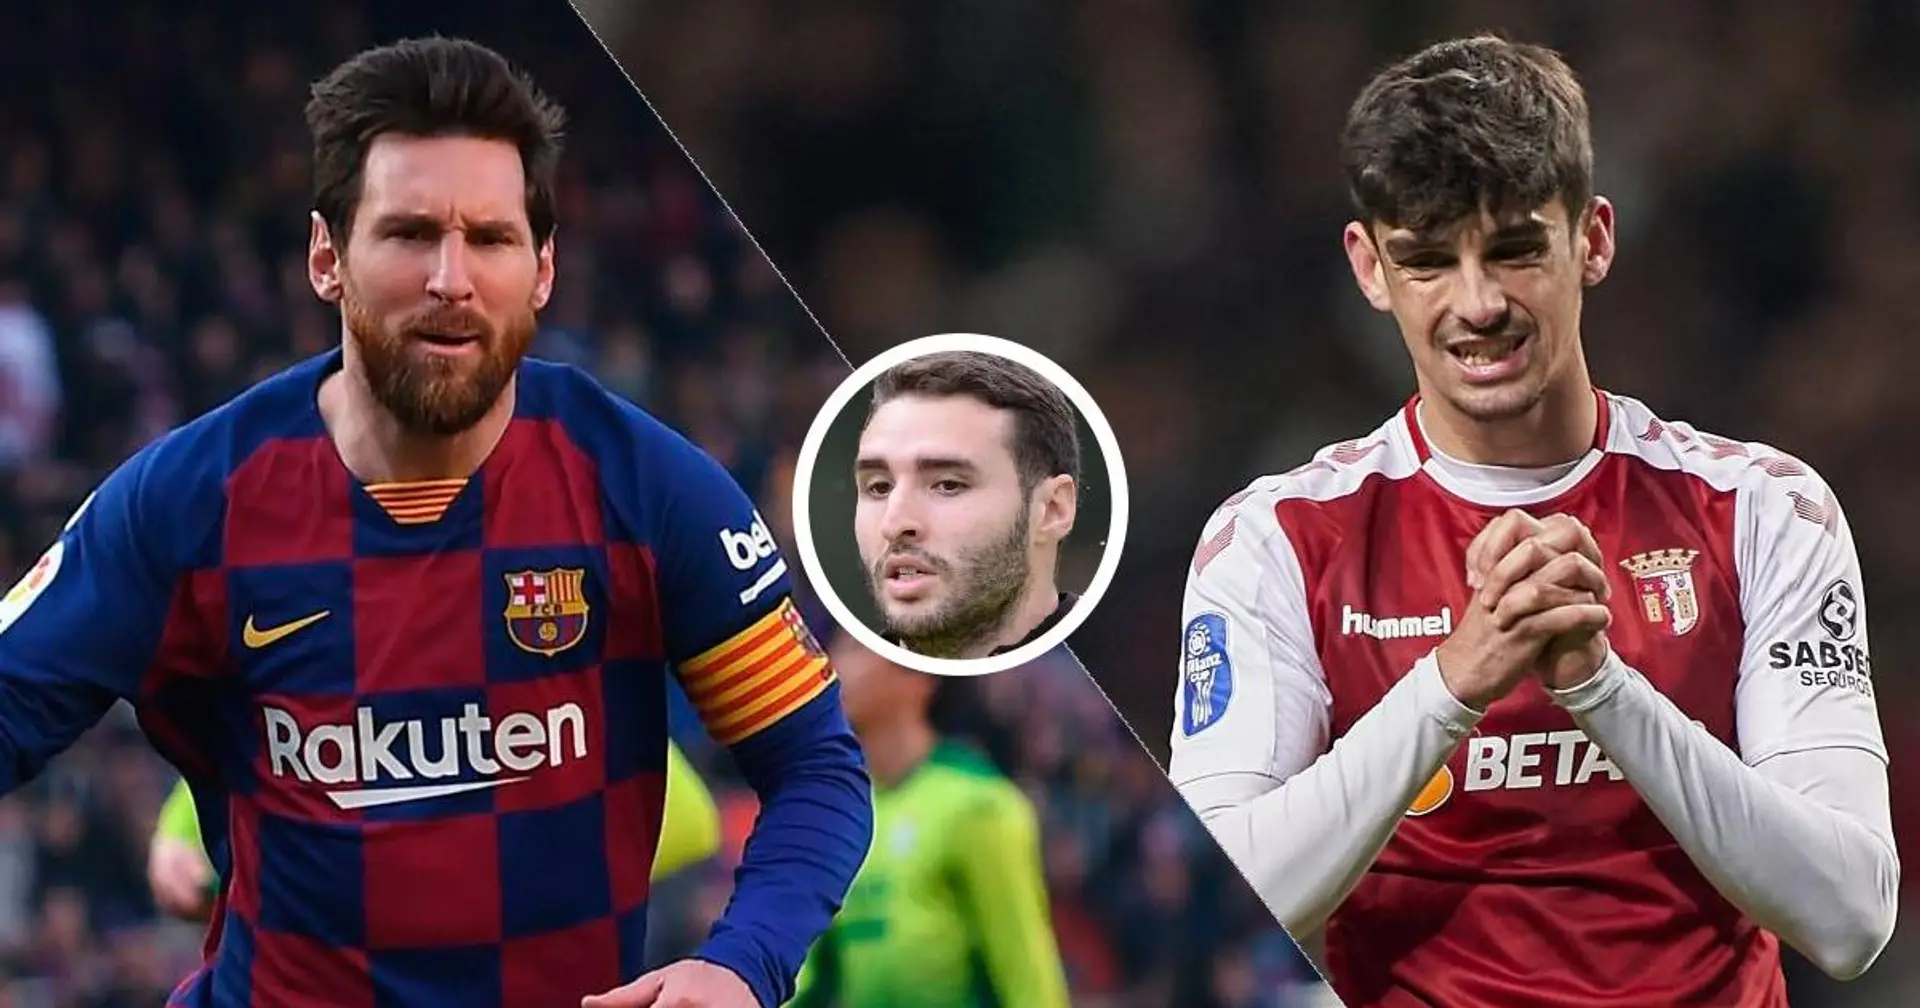 Abel Ruiz heaps praise on Trincao, likens him to one and only Leo Messi